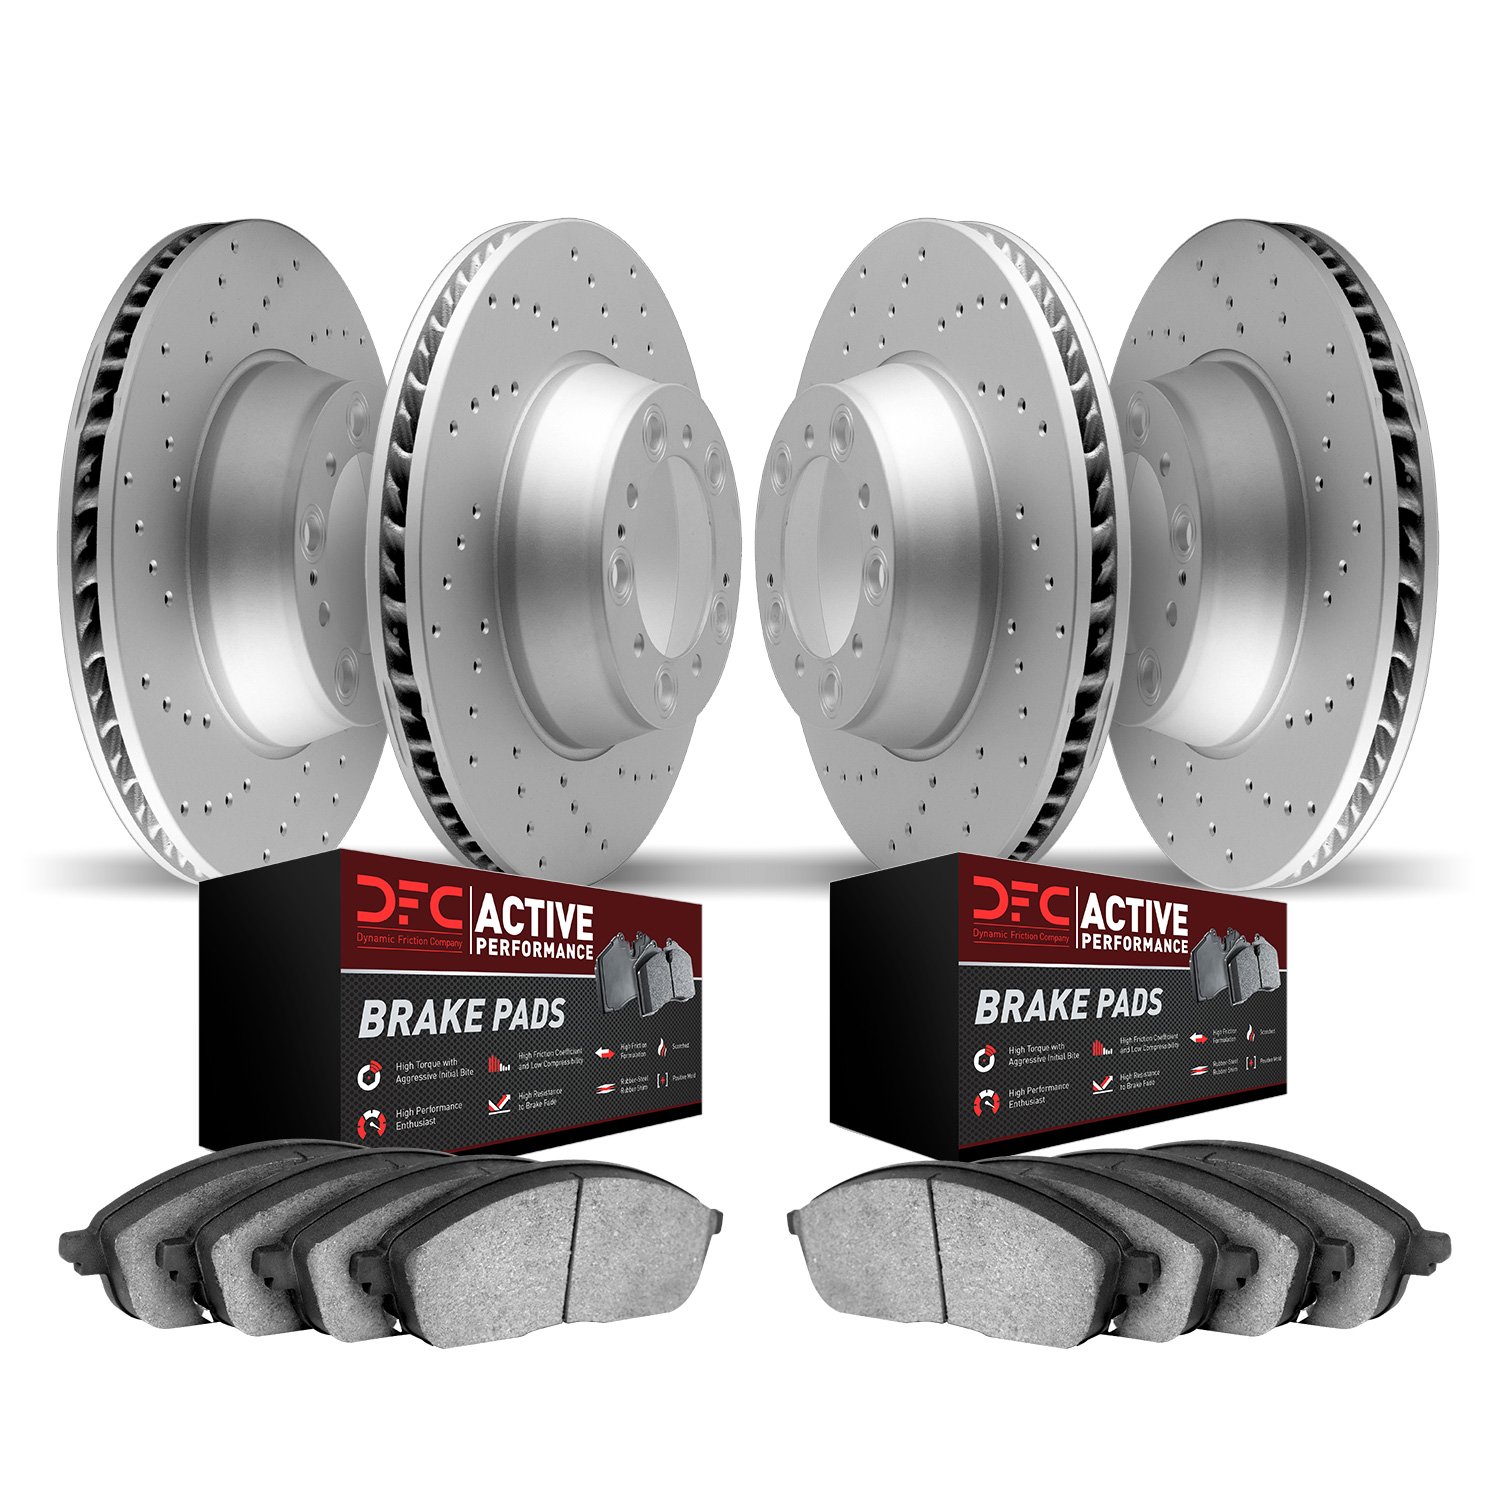 2704-74032 Geoperformance Drilled Brake Rotors with Active Performance Pads Kit, 2003-2015 Multiple Makes/Models, Position: Fron